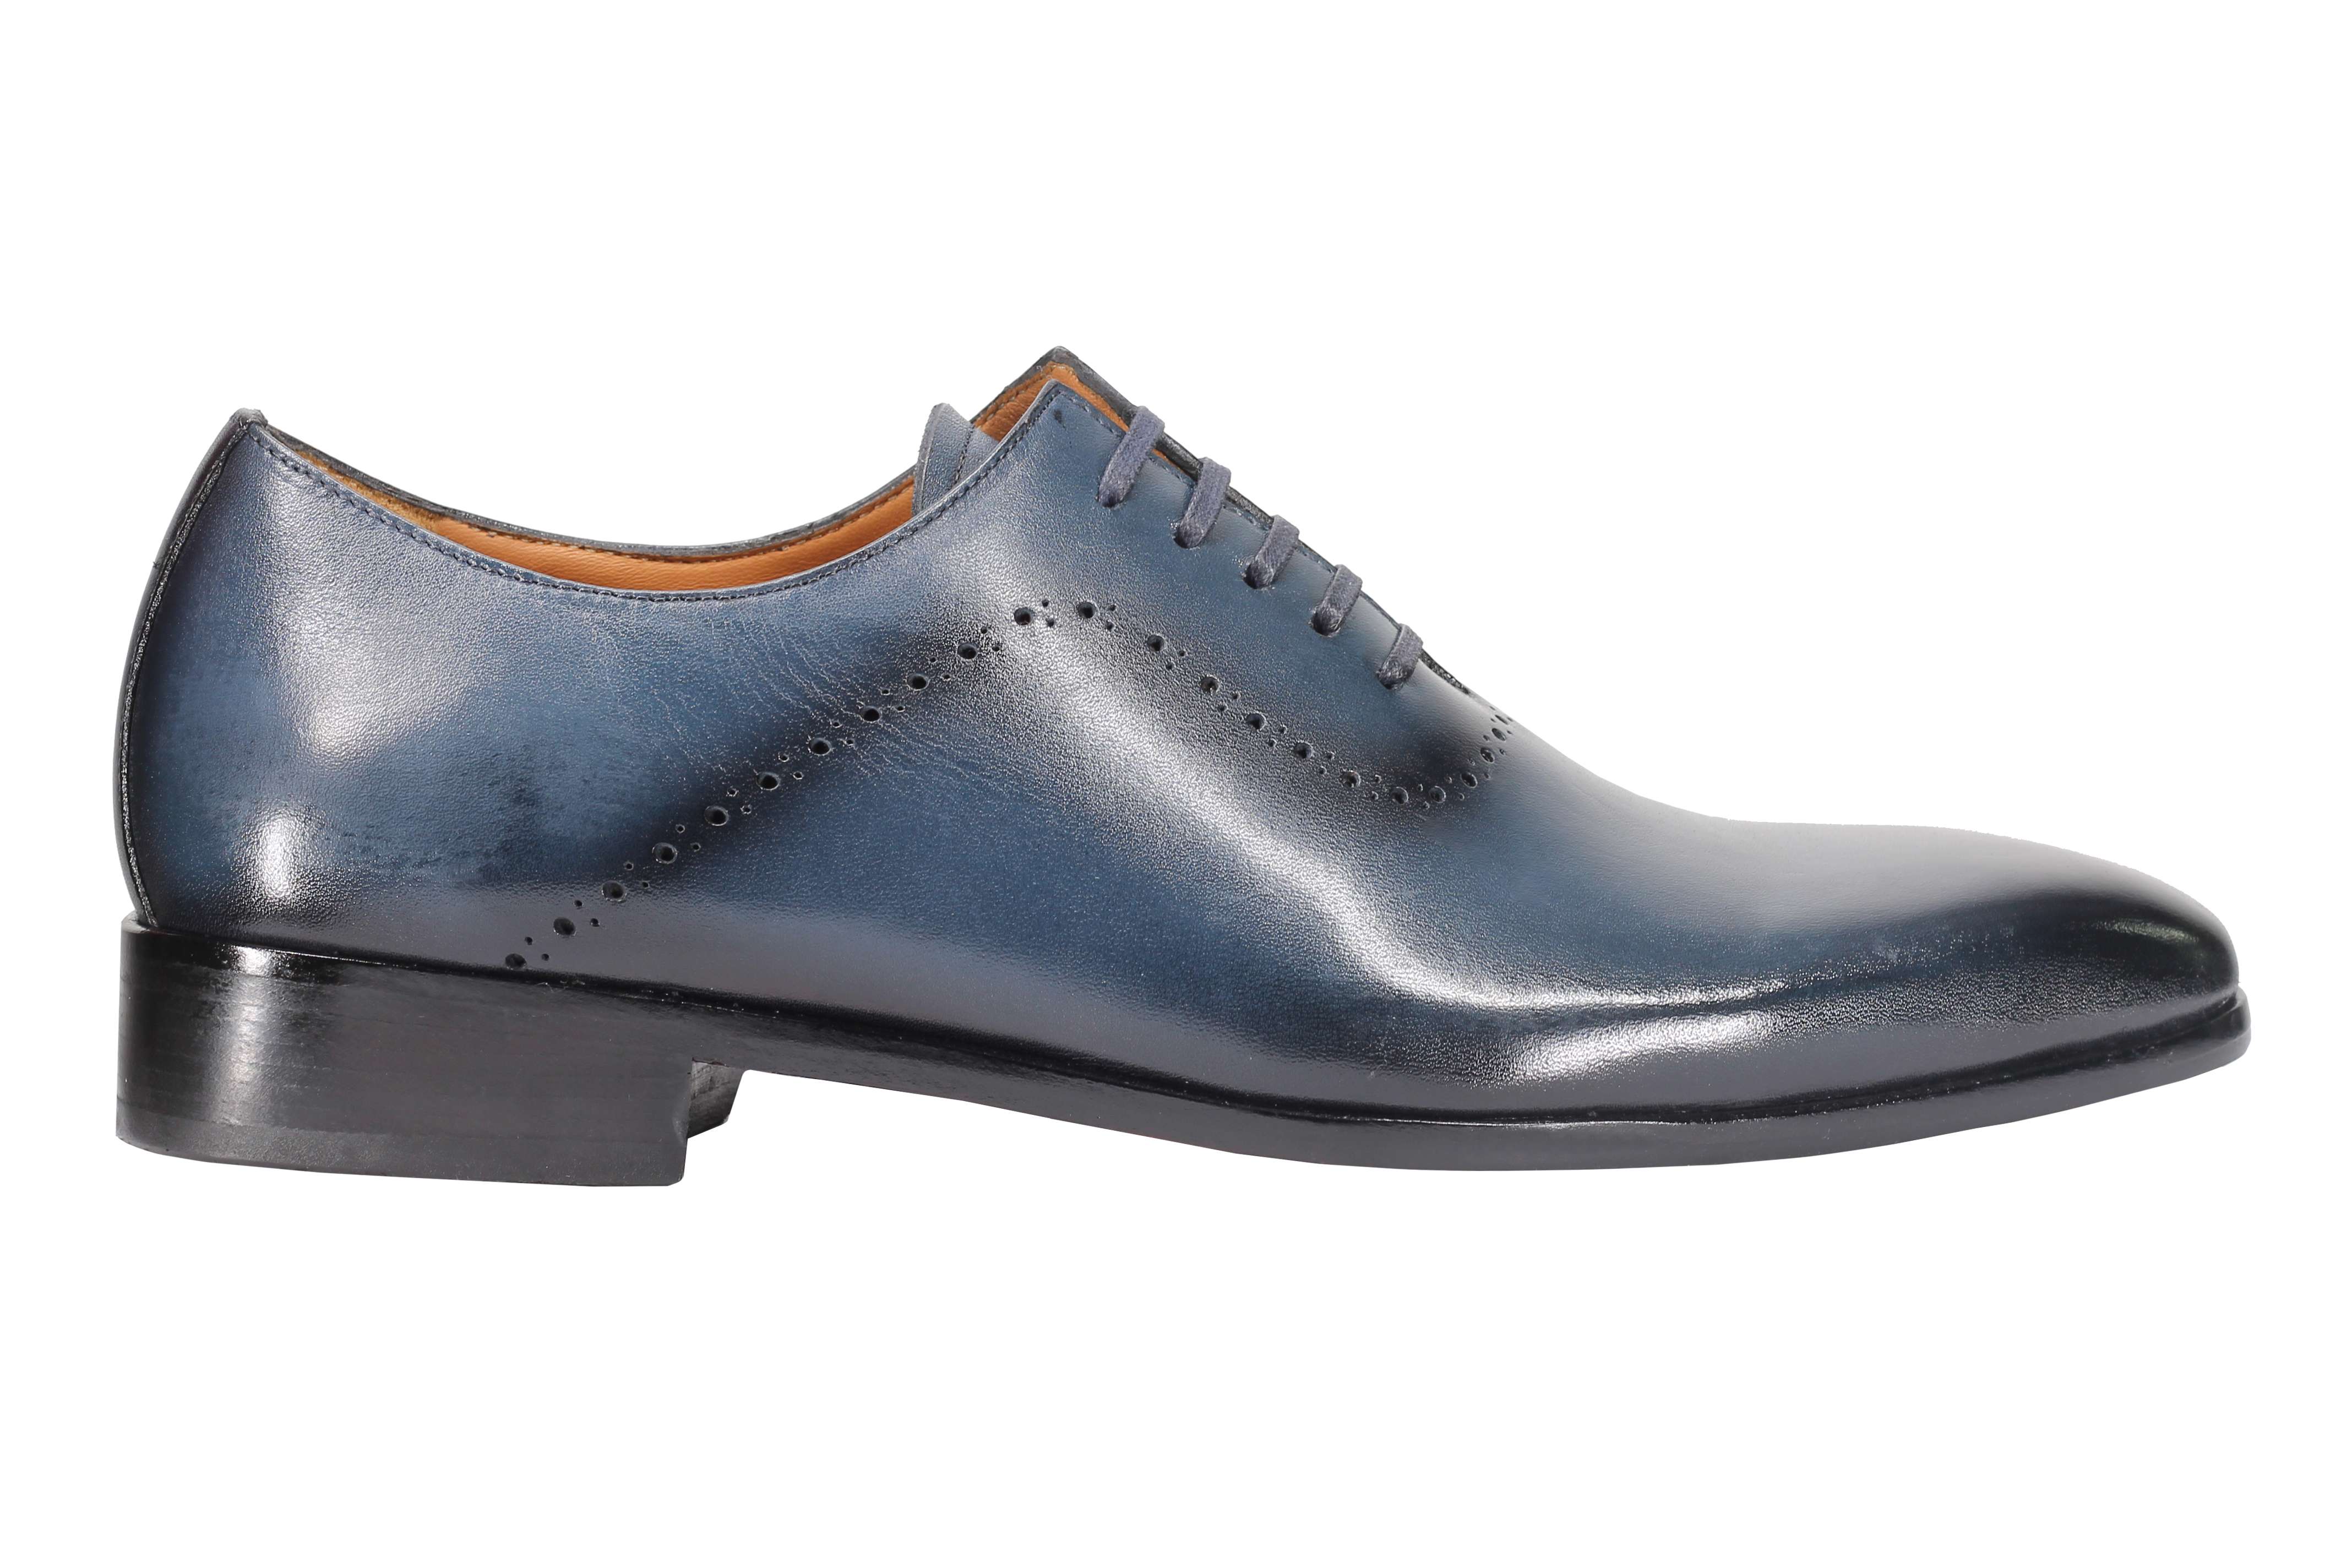 BLUE CALF LEATHER OXFORD LACE UP BROGUE SHOES